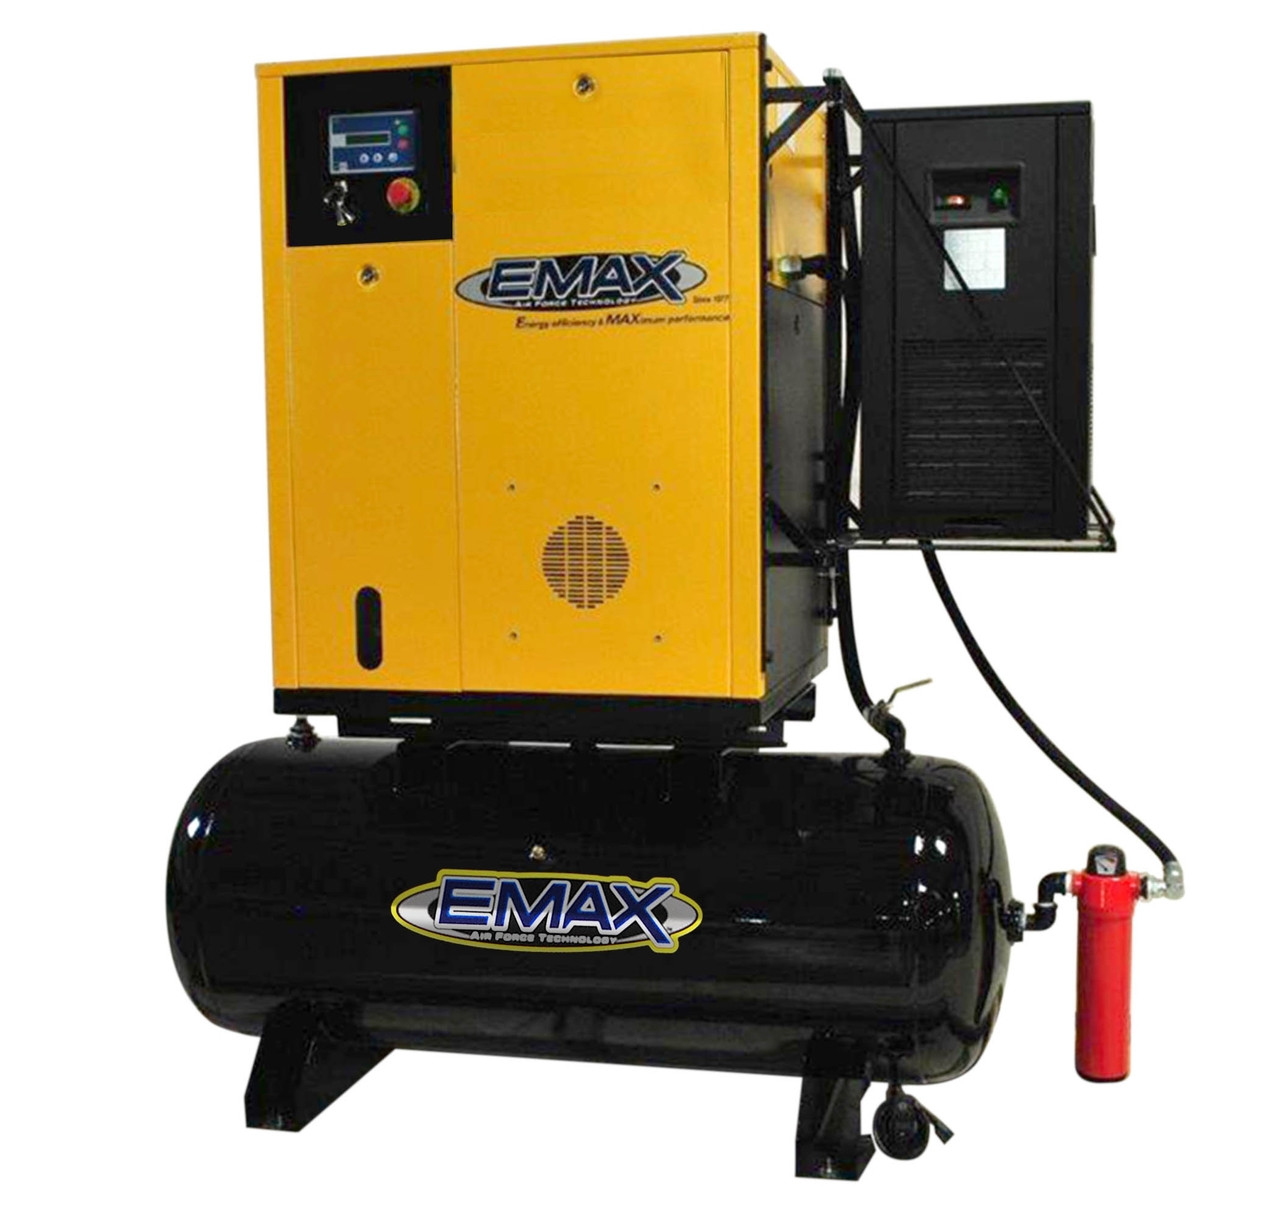 Emax ERSK070001 7.5 HP Single Phase Rotary Screw Air Compressor with Dryer